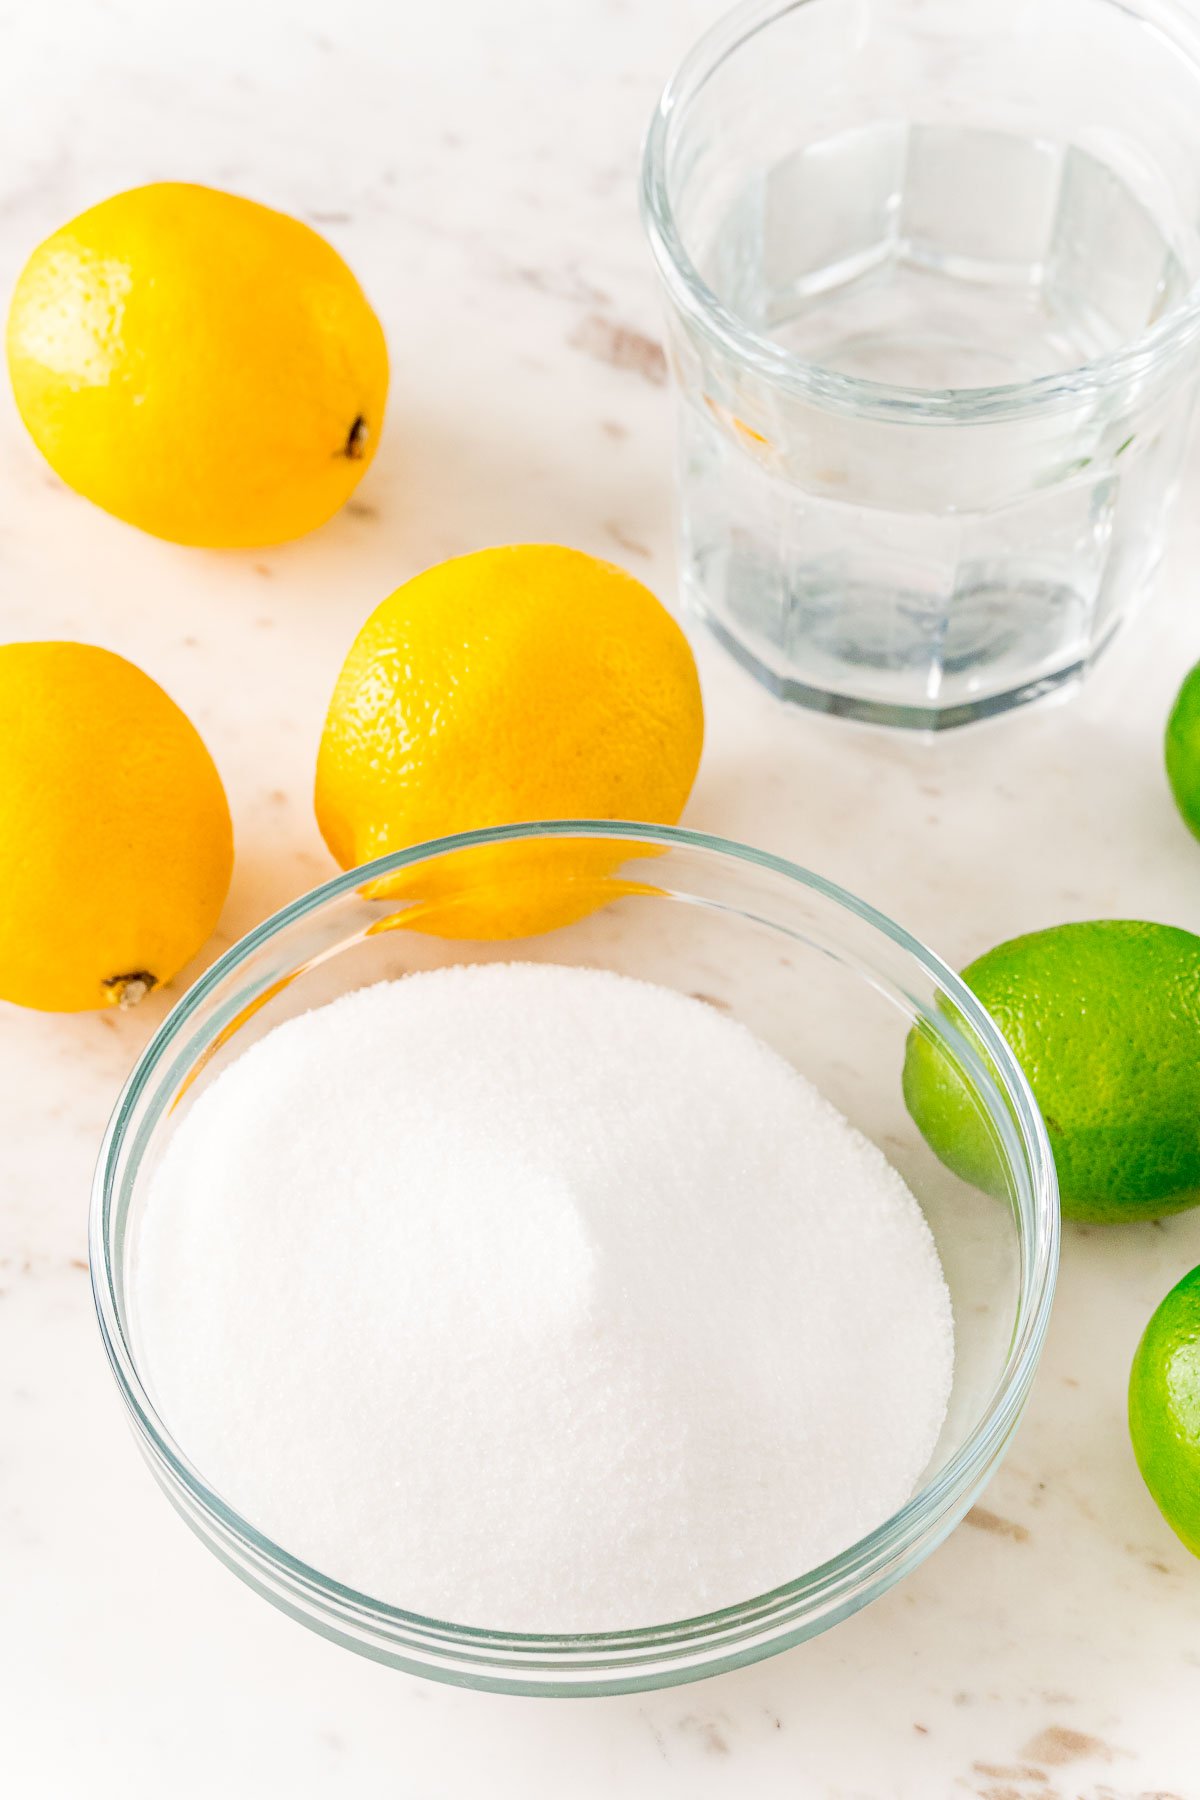 Ingredients to make homemade sour mix